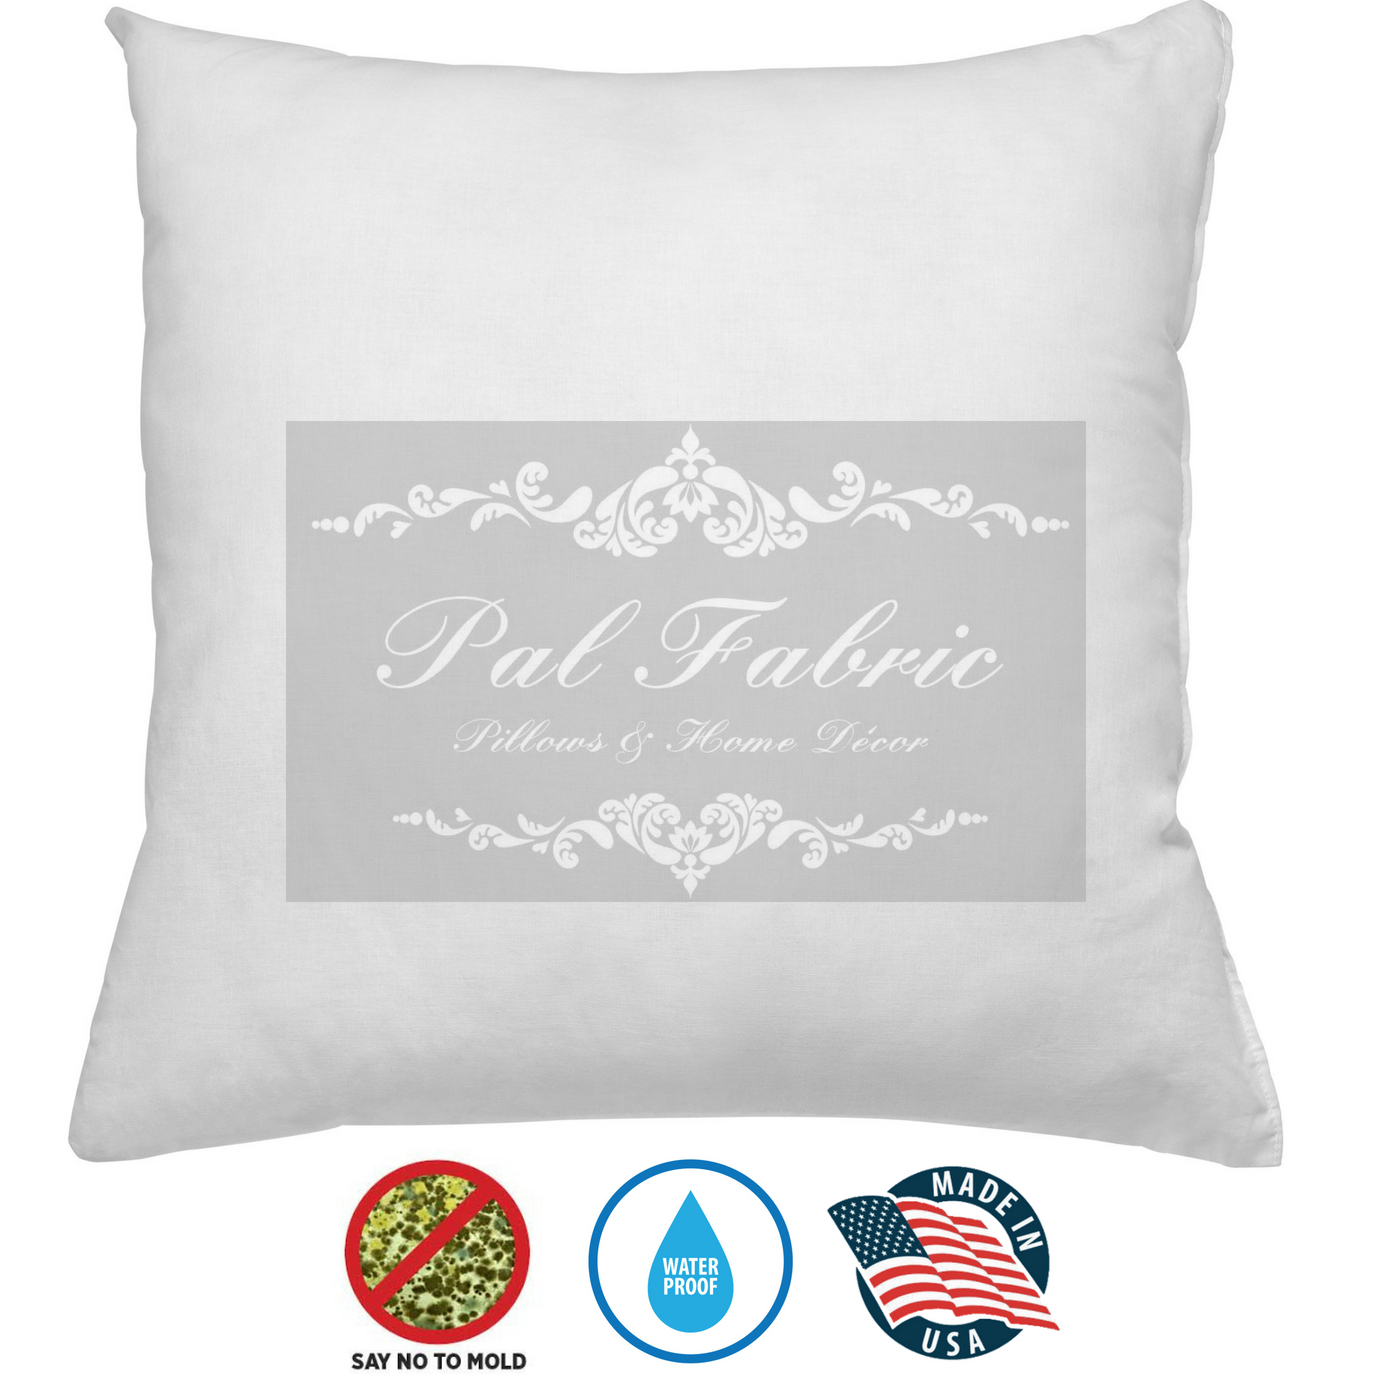 Pal Fabric Outdoor Anti-Mold Waterproof Square Sham Pillow Insert Made in USA (18x18) 